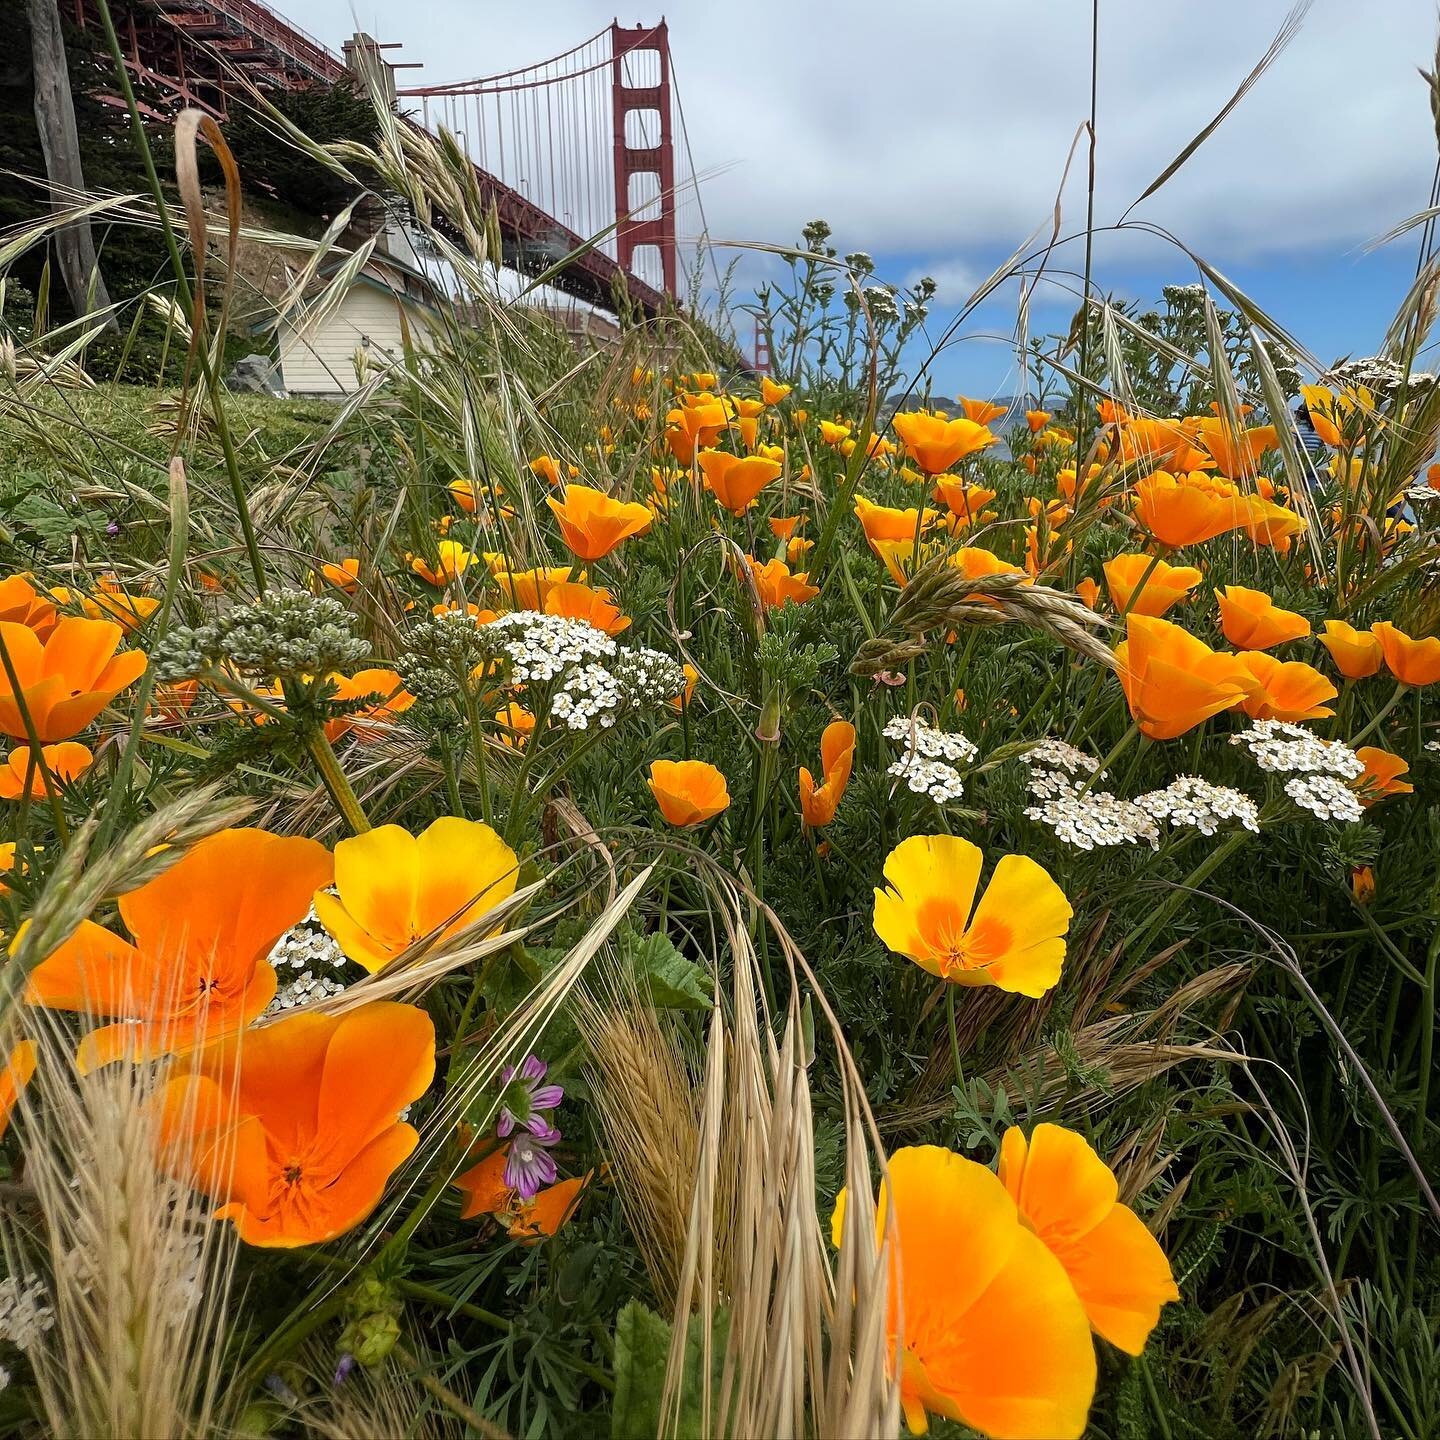 🧡SUPERBLOOM 🧡

&ldquo;[California golden poppies] are of a burning color - not orange, not gold, but if pure gold were liquid and could raise a cream, that golden cream might be like the color of the poppies.&rdquo;
-John Steinbeck, East of Eden
#n